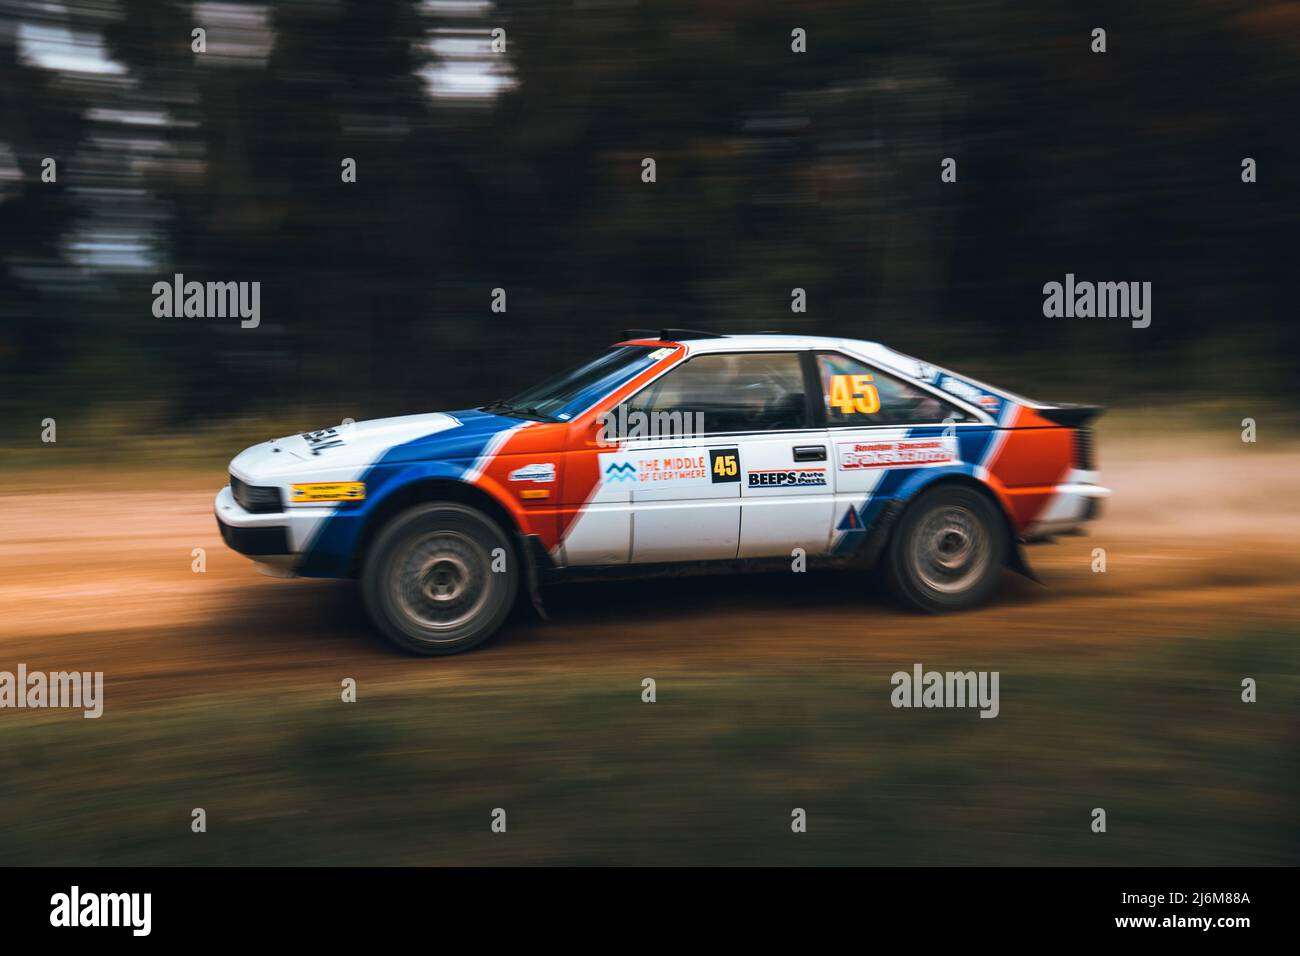 The #45 car being driven by Brian Semmens with navigator Daniel Parry flying through SS3 in the 2021 Gippsland Rally in Heyfield, Victoria, Australia. Stock Photo